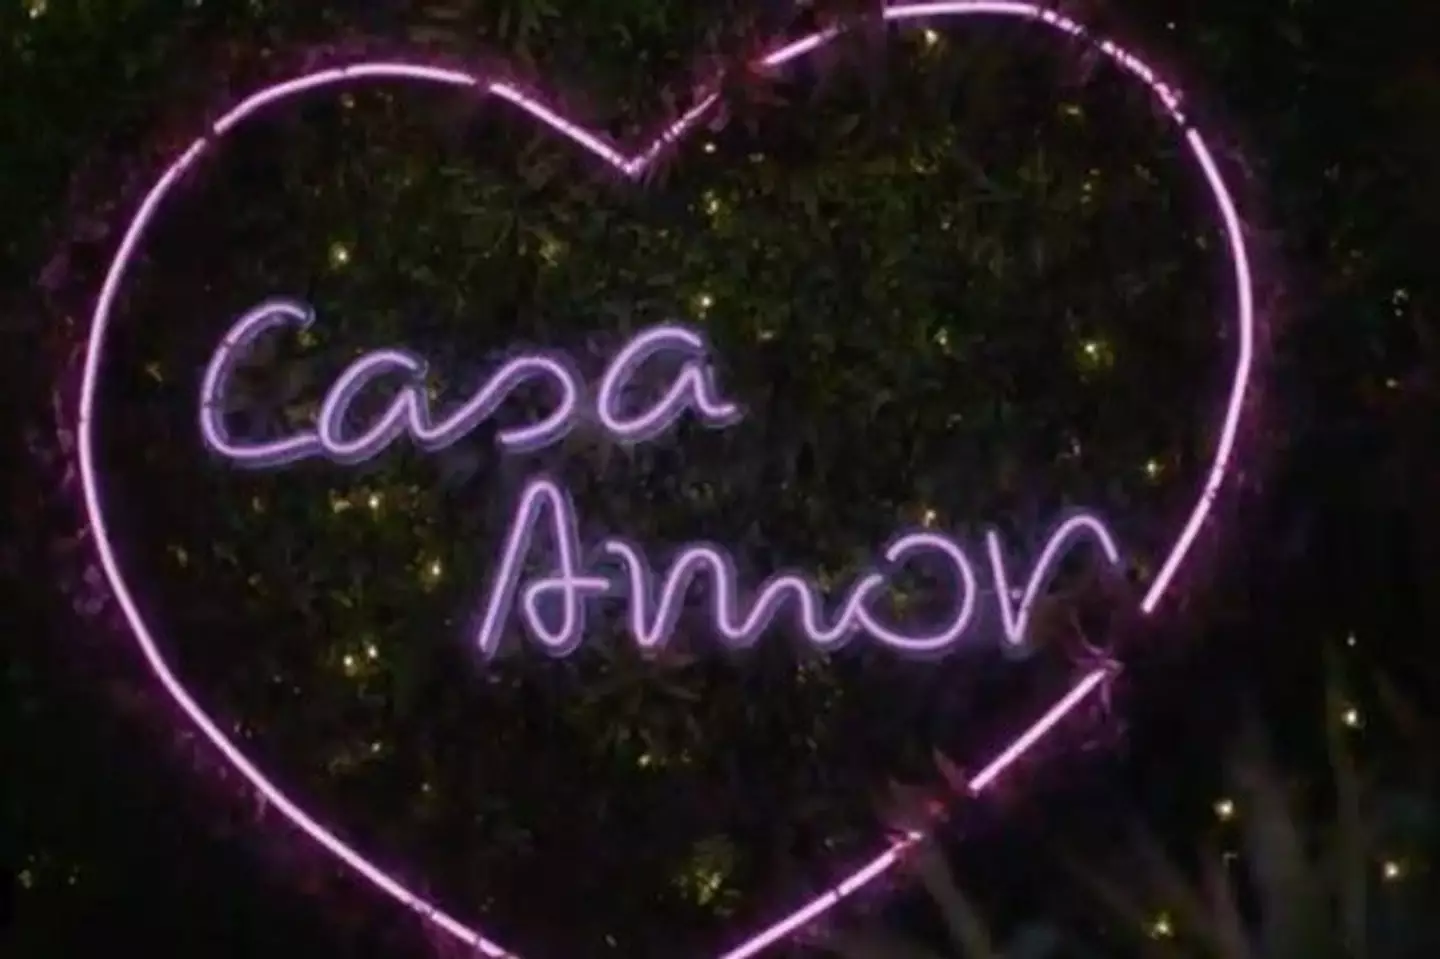 Reports indicate Casa Amor will be back soon.